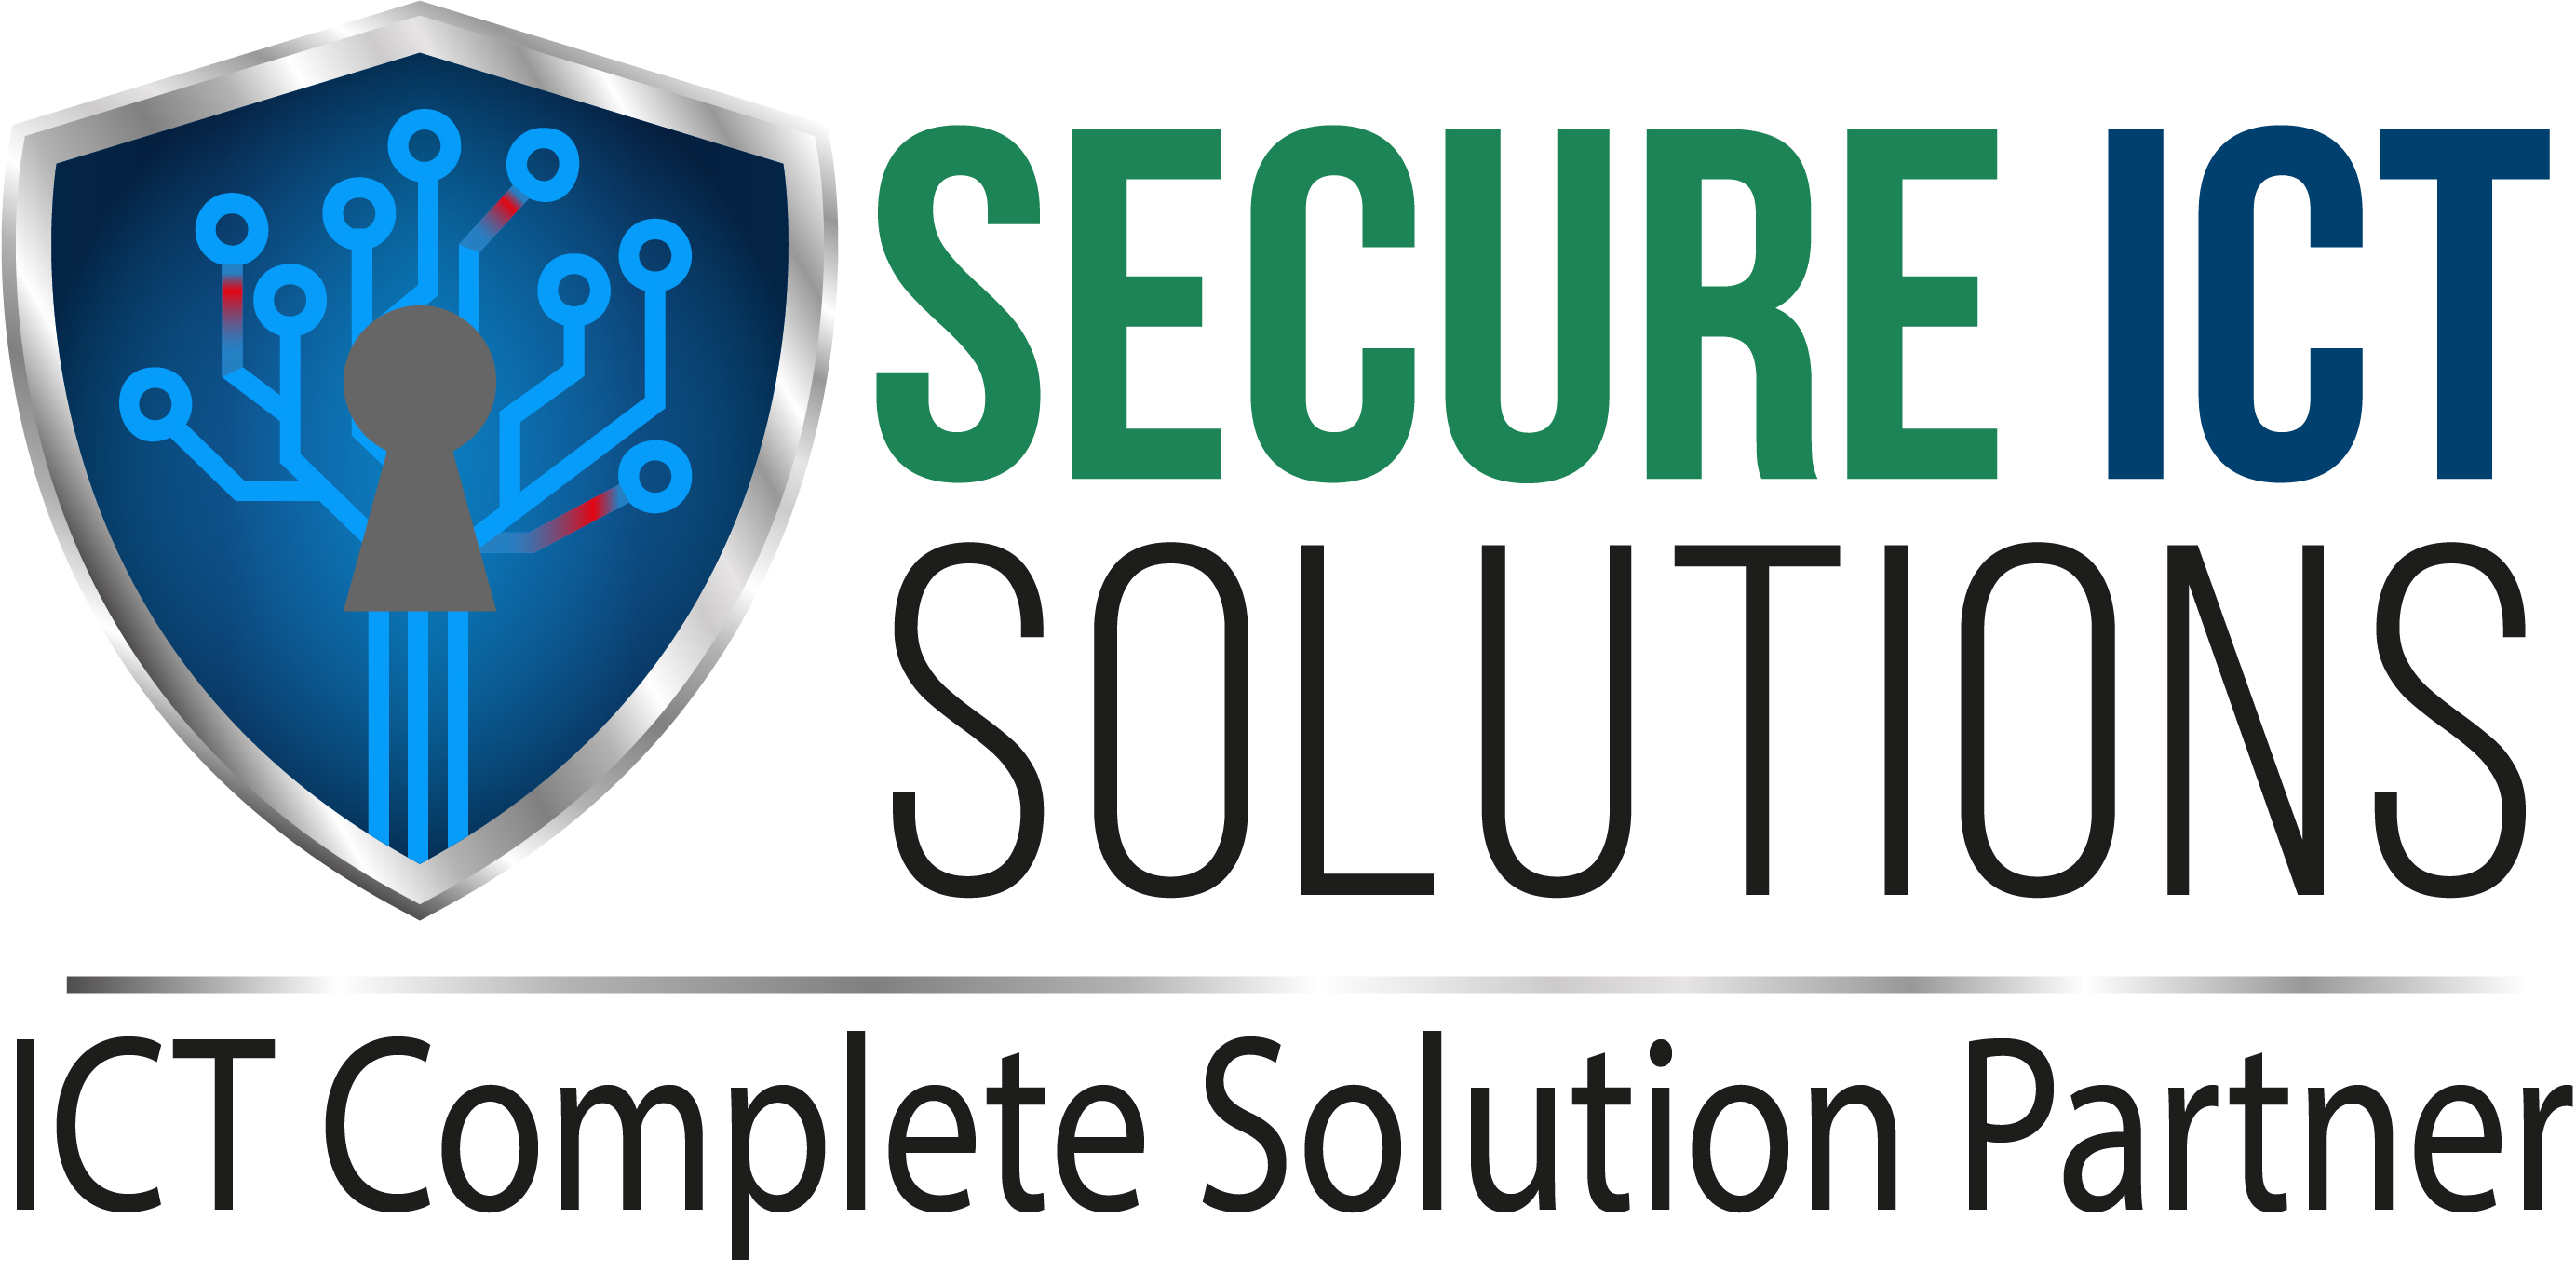 Secure ICT Solution